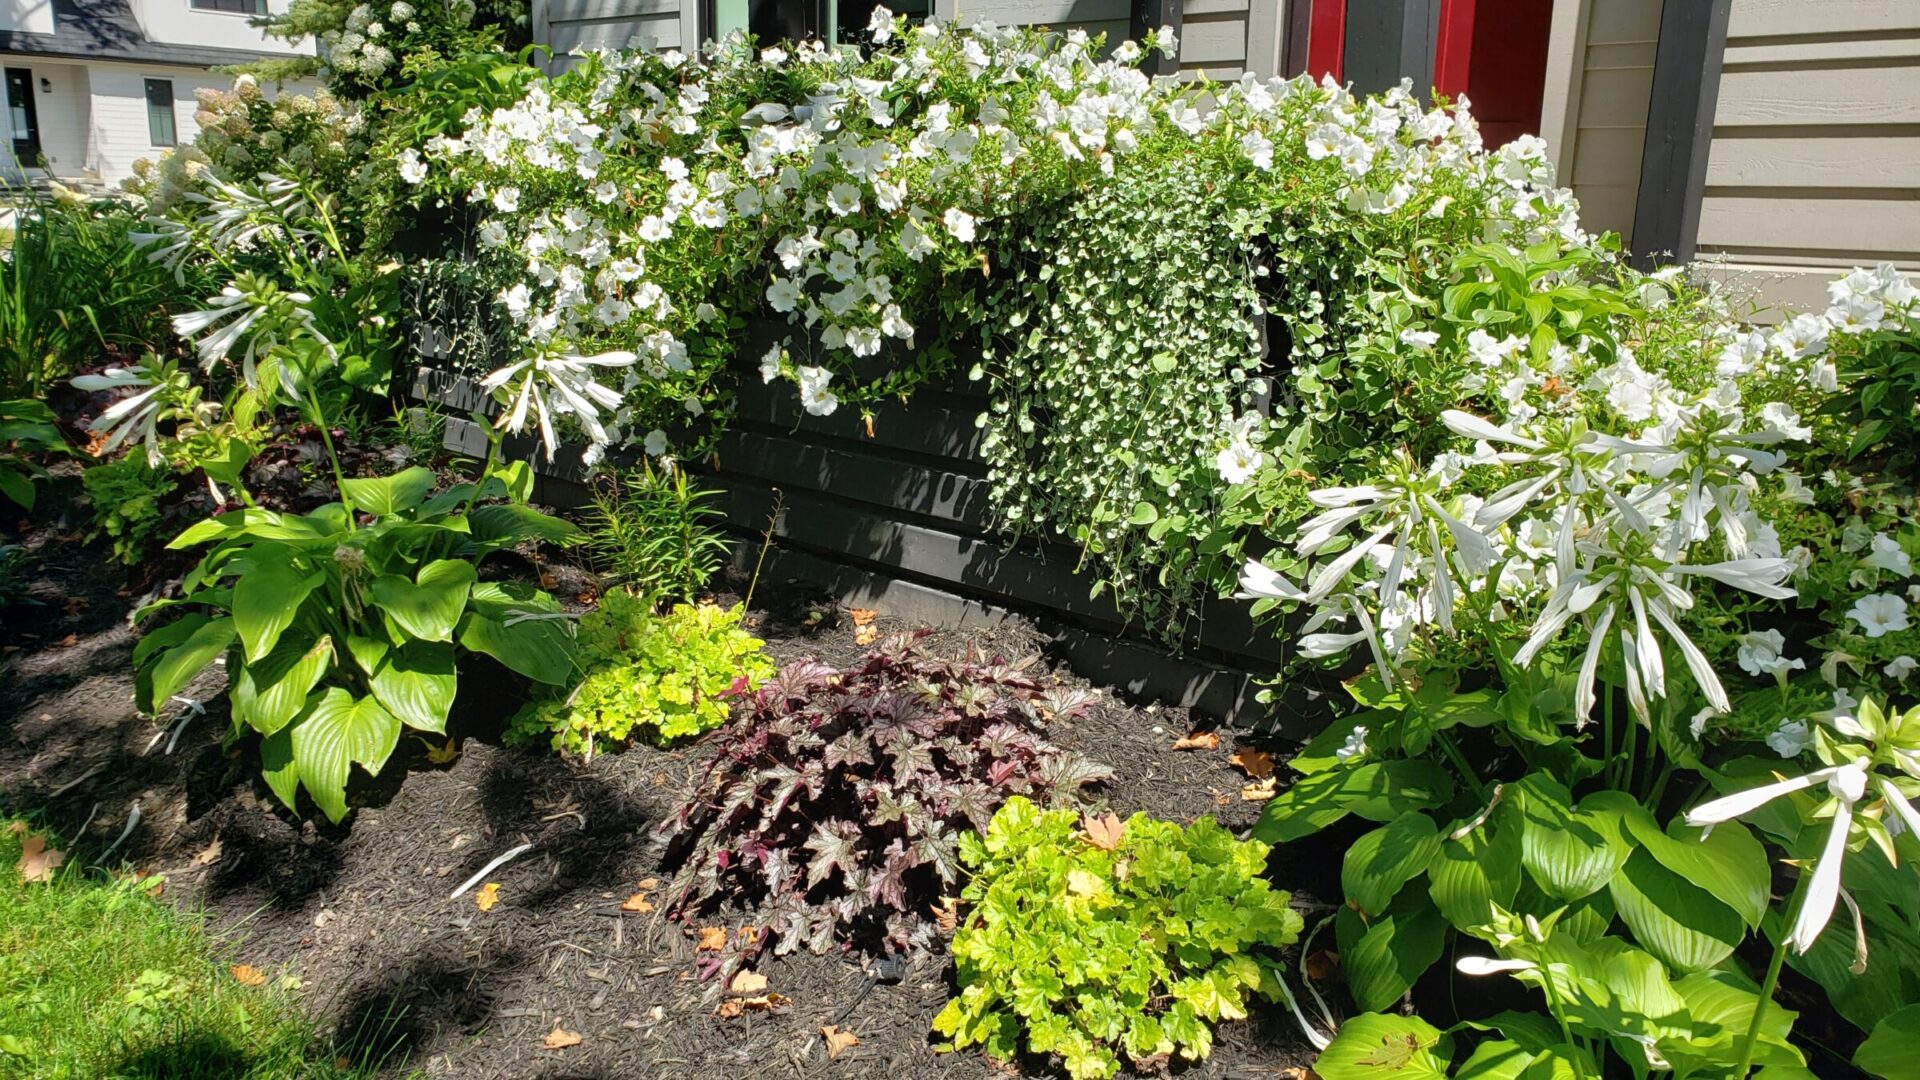 The image shows a lush flowerbed with white blossoms and various green plants against a backdrop of a building with neutral-colored siding.